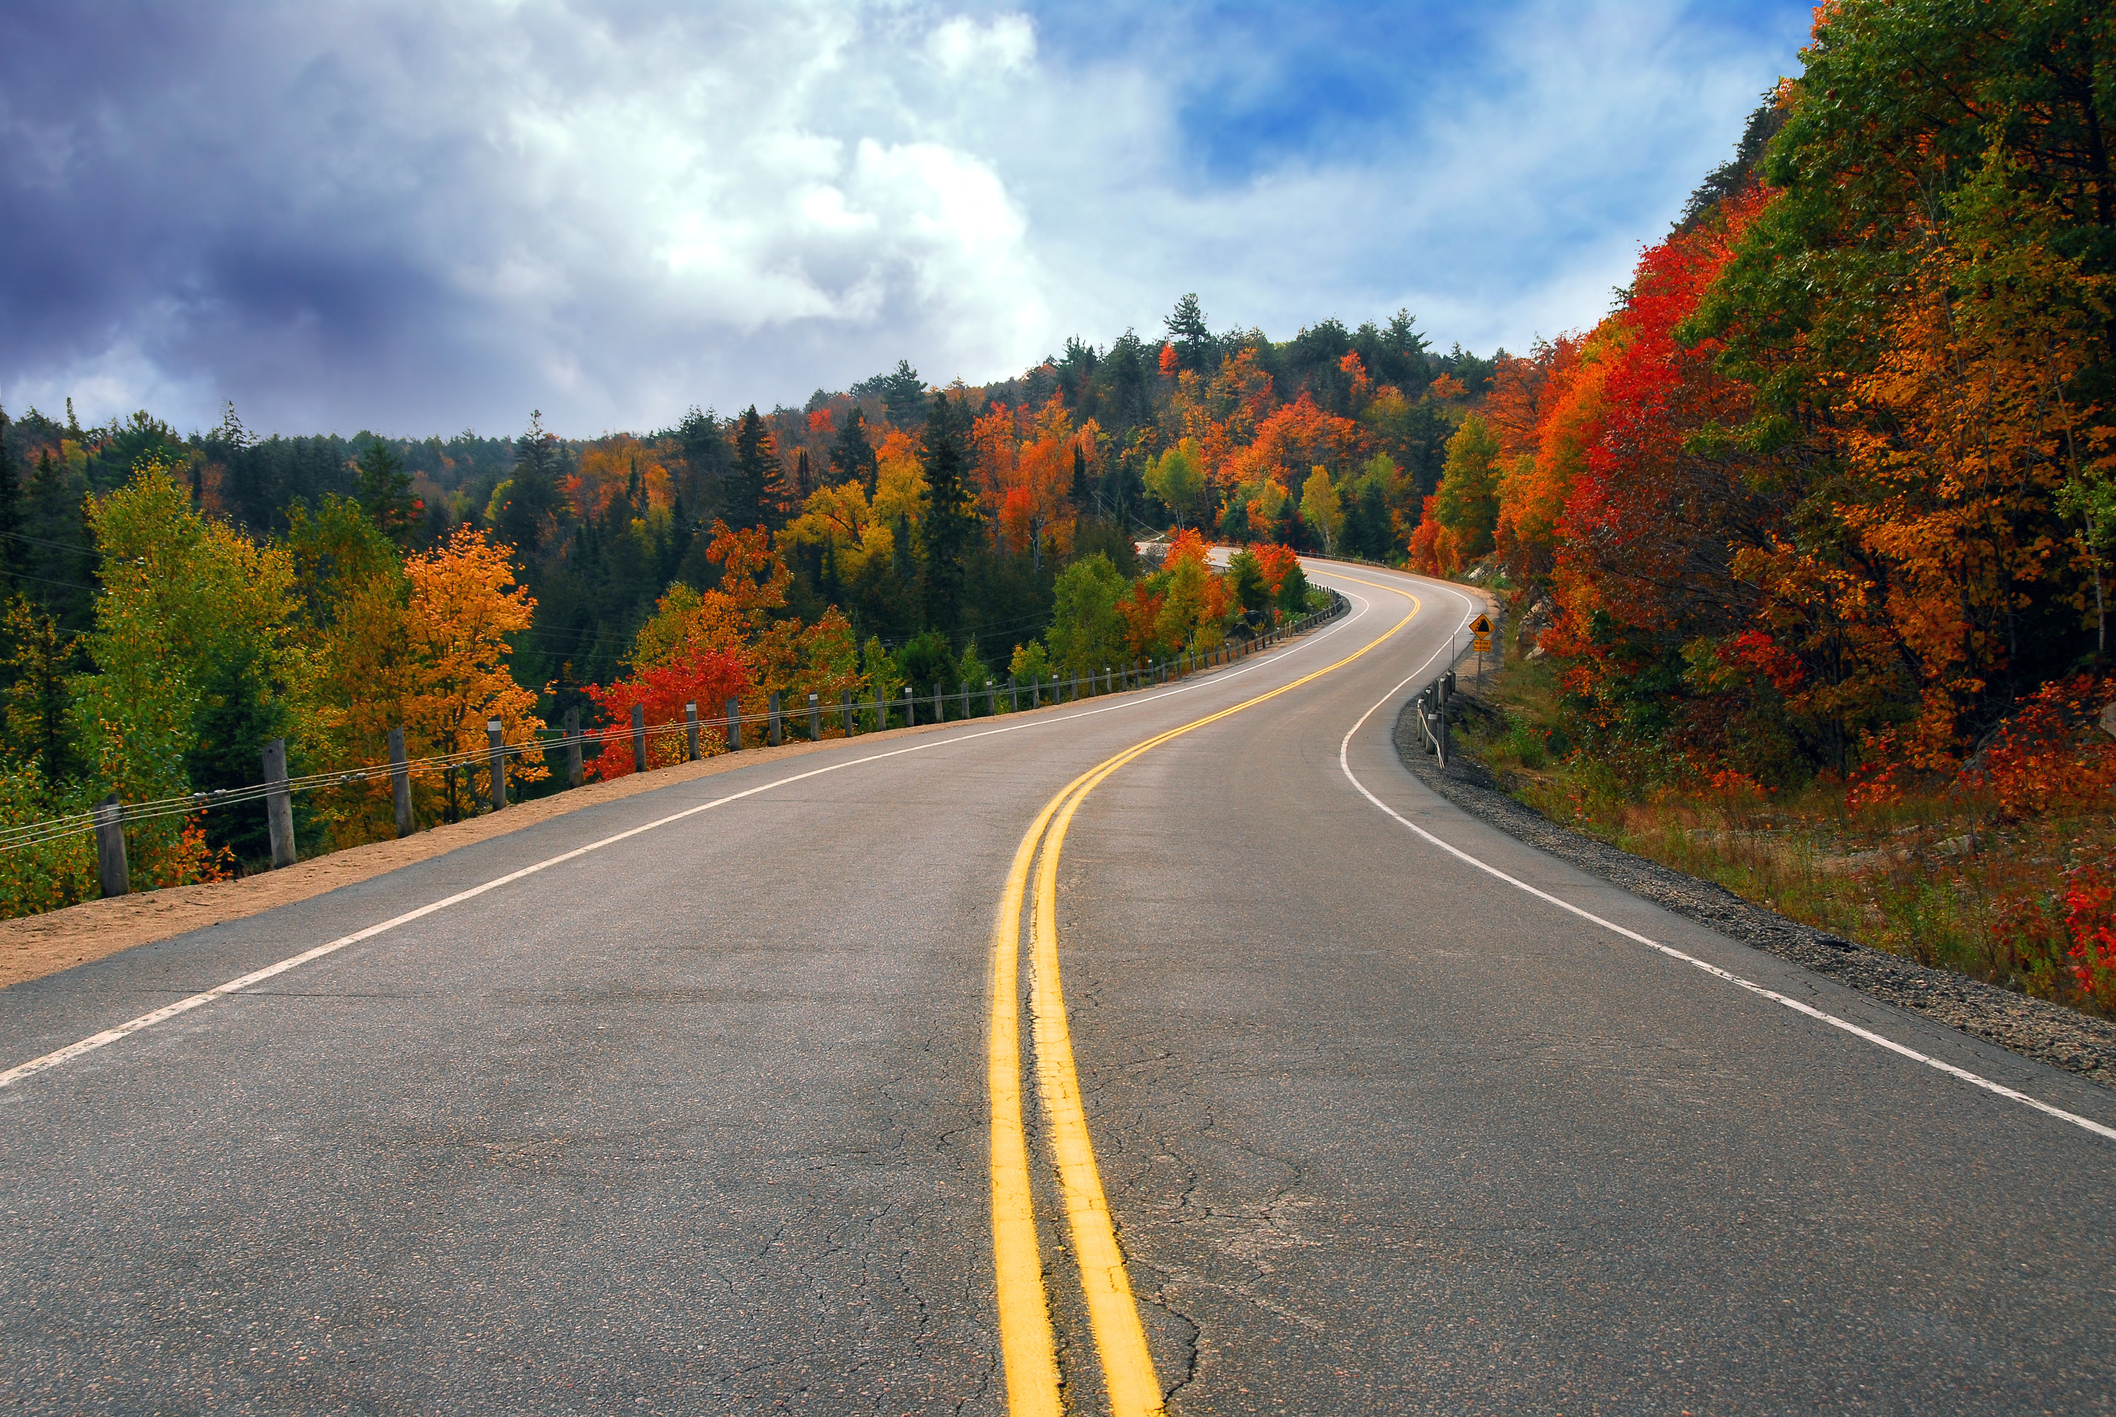 Mills Ford Chrysler Travel Guide for the Perfect Fall Road Trip